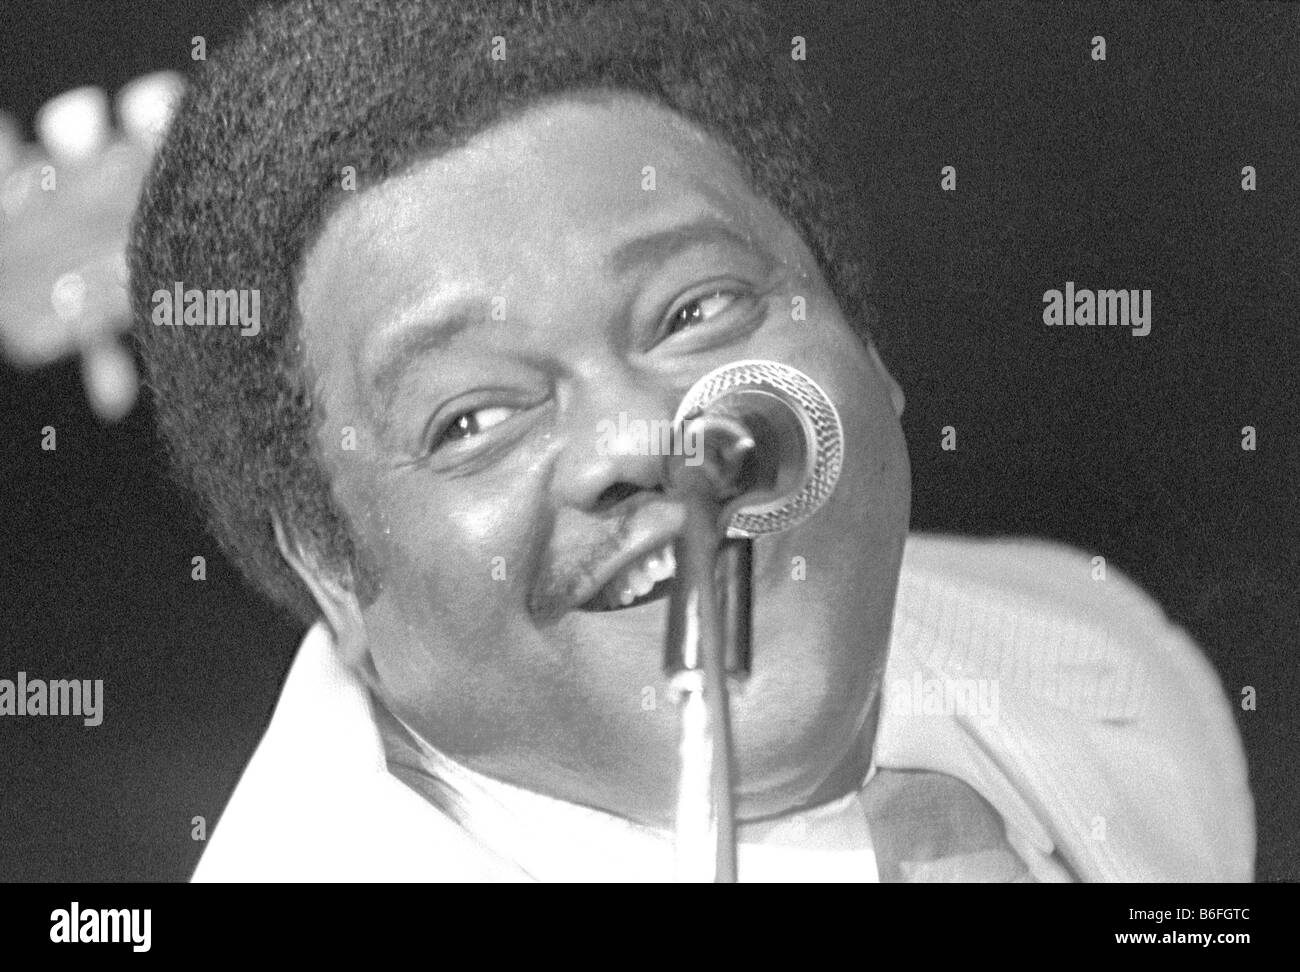 Fats Domino concert, Eutiner Jazz Days, on July 23, 1980 in Germany, - fats-domino-concert-eutiner-jazz-days-on-july-23-1980-in-germany-europe-B6FGTC